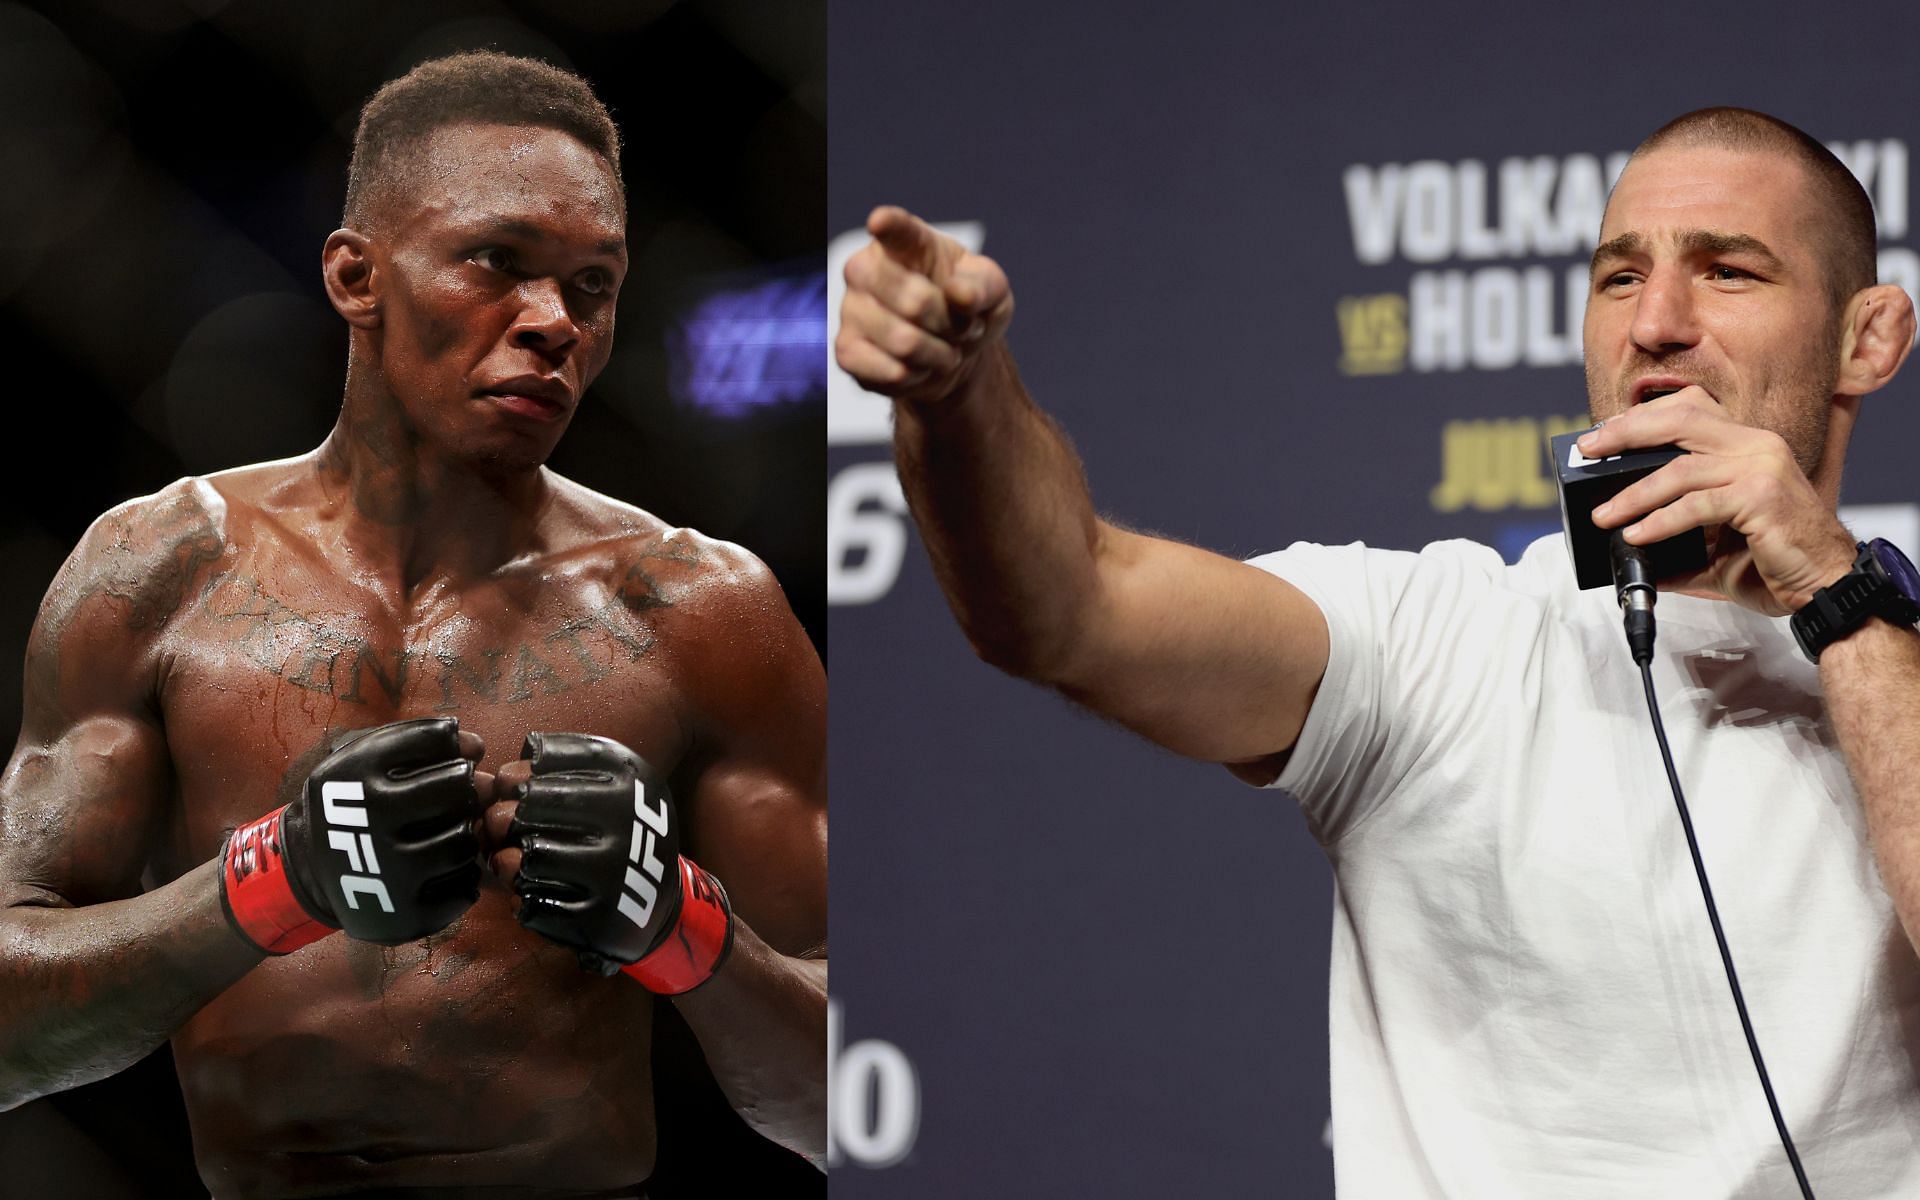 Israel Adesanya (left) and Sean Strickland (right). [via Getty Images]